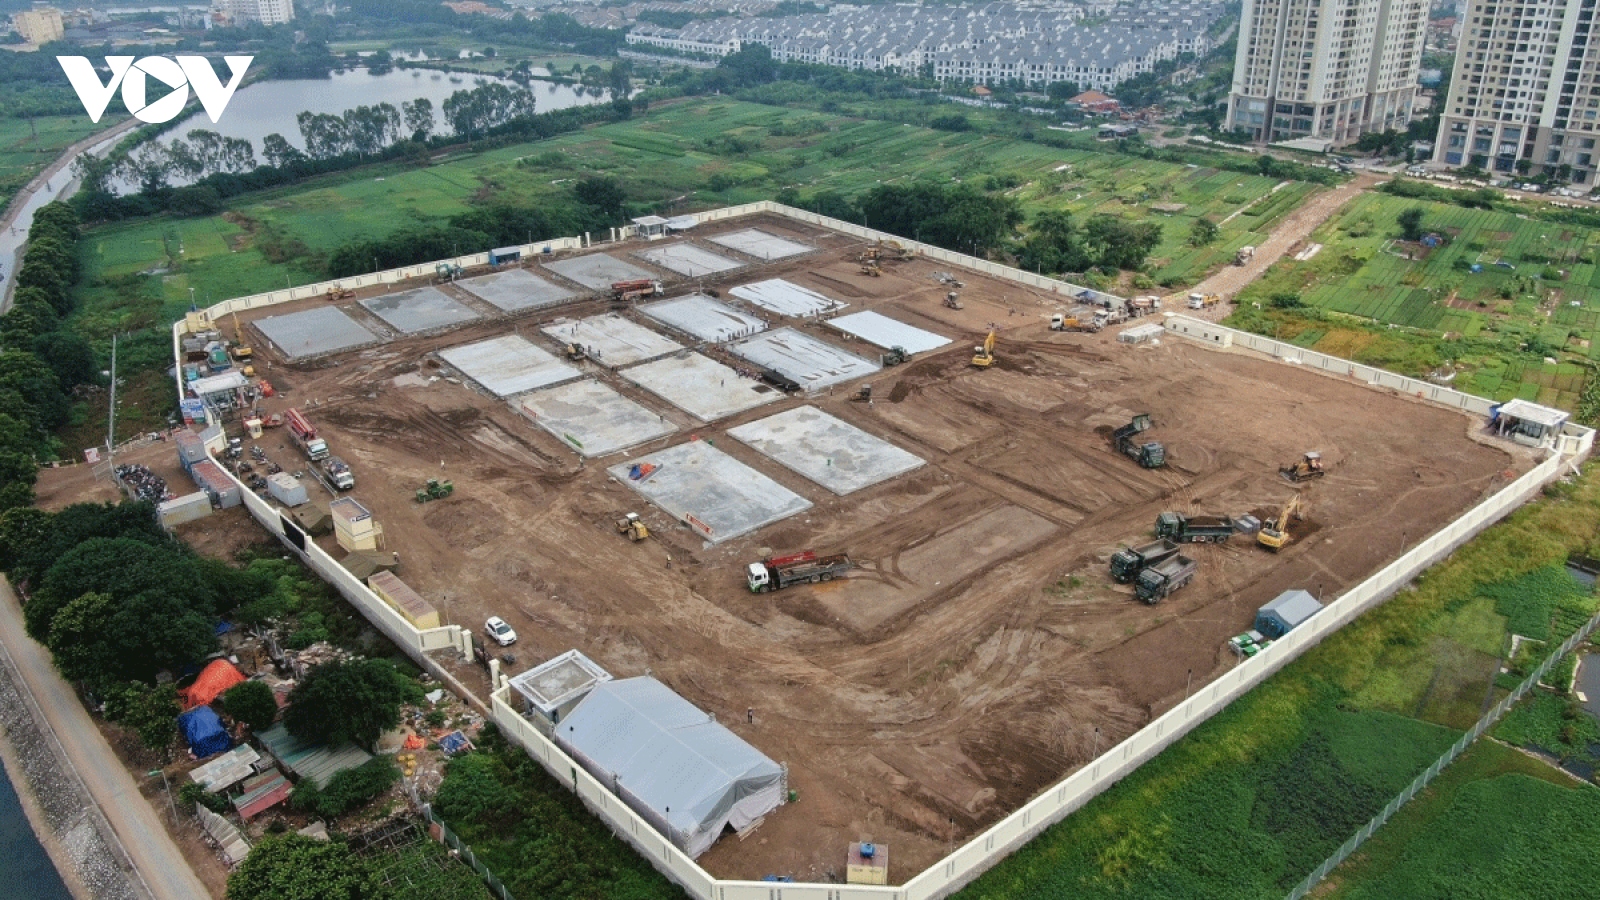 Field hospital for COVID-19 patients takes shape in Hanoi